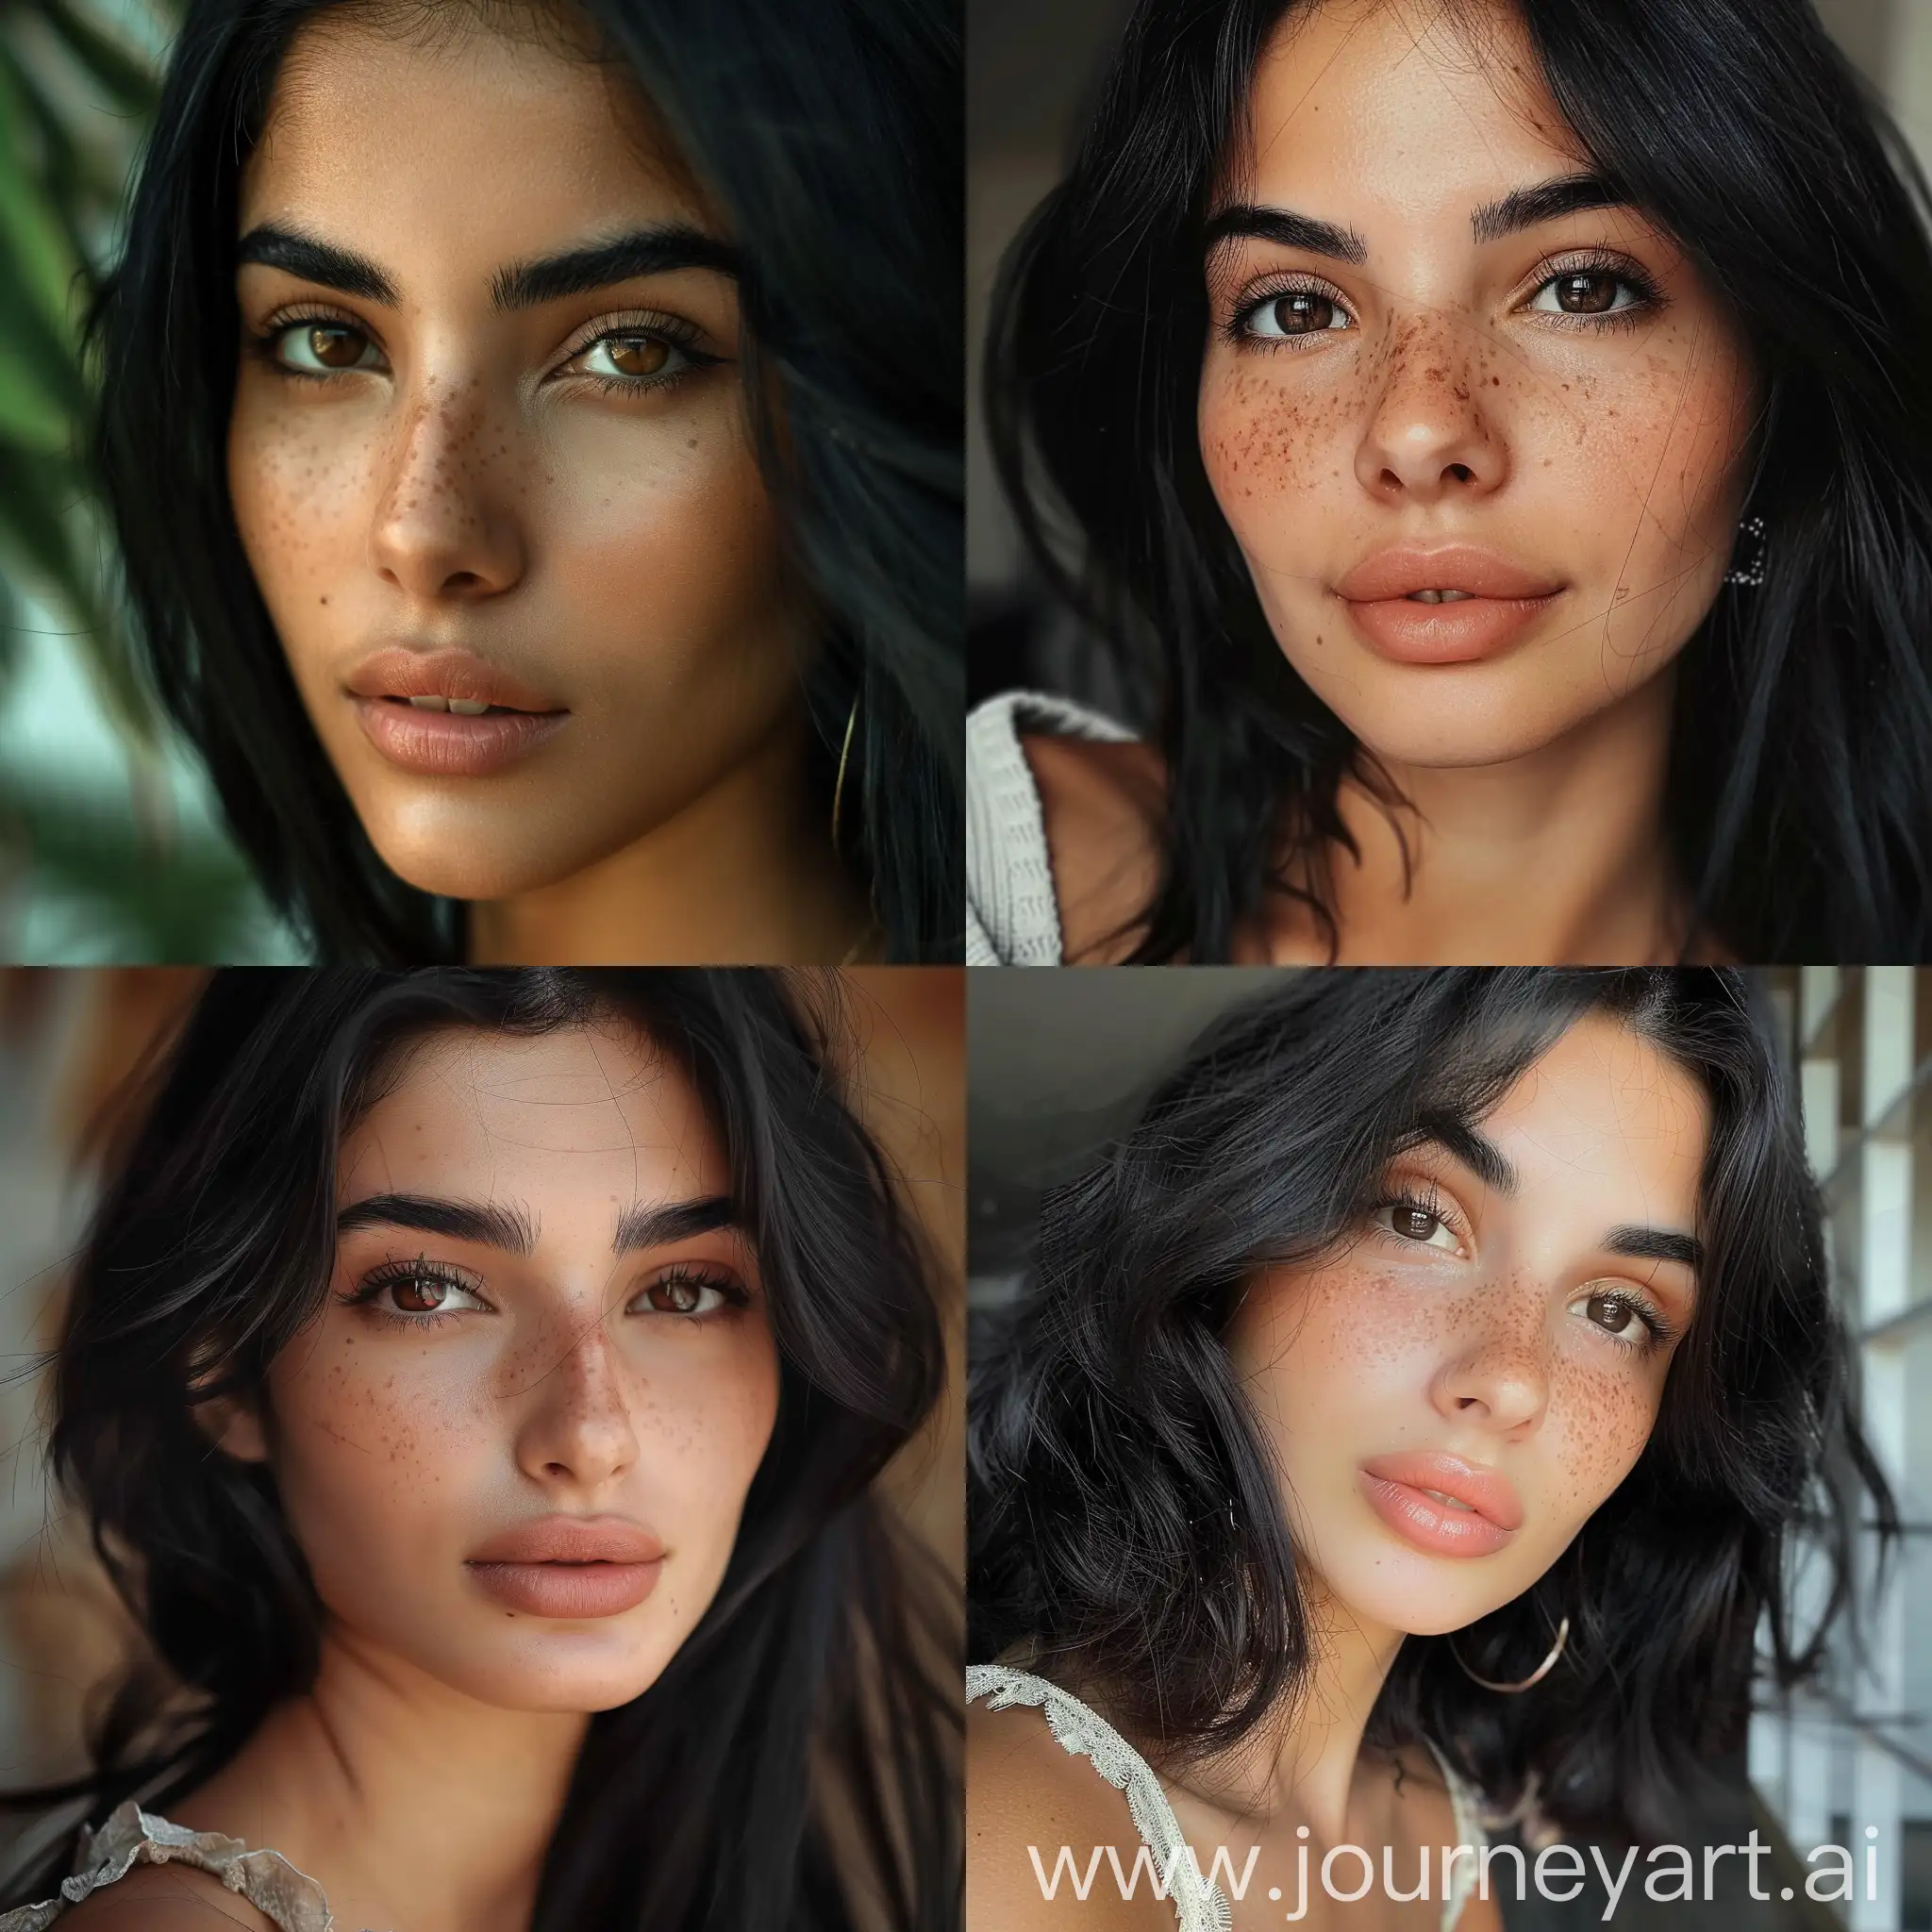 Armenian-Girls-with-Black-Hair-and-Brown-Eyes-in-Radiant-Sunlight